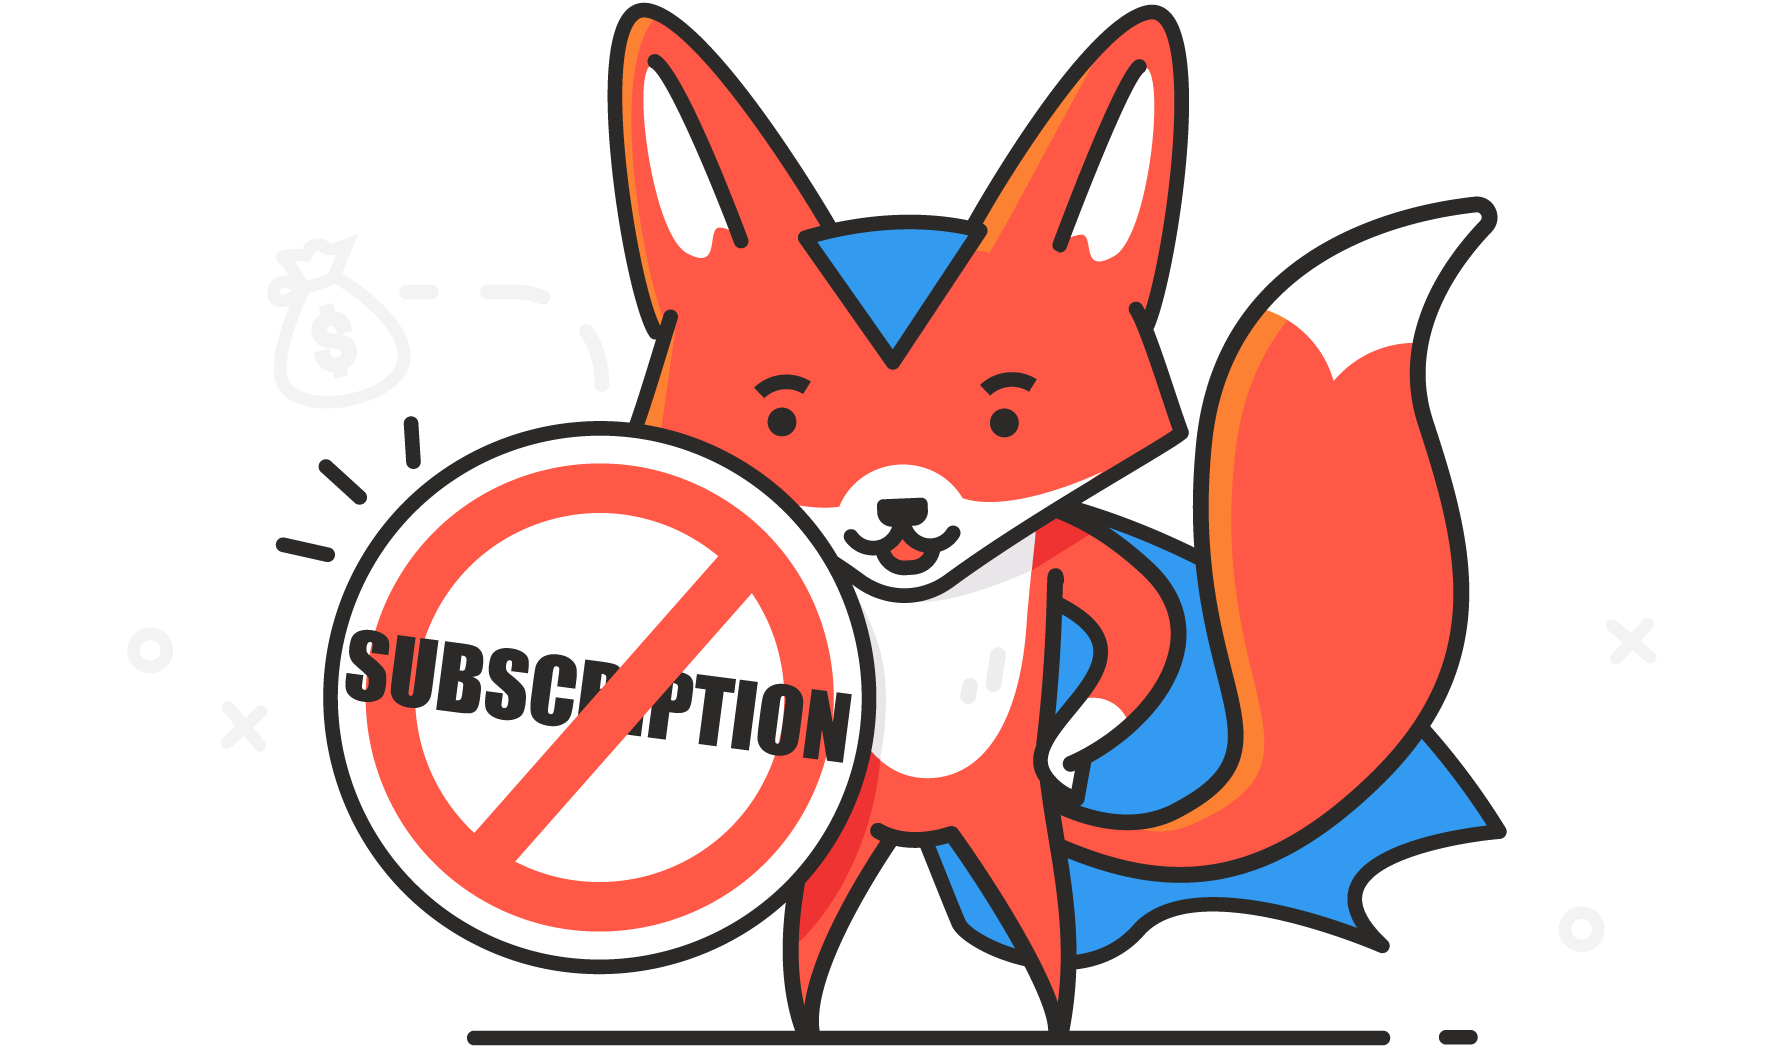 No Annual Subscriptions